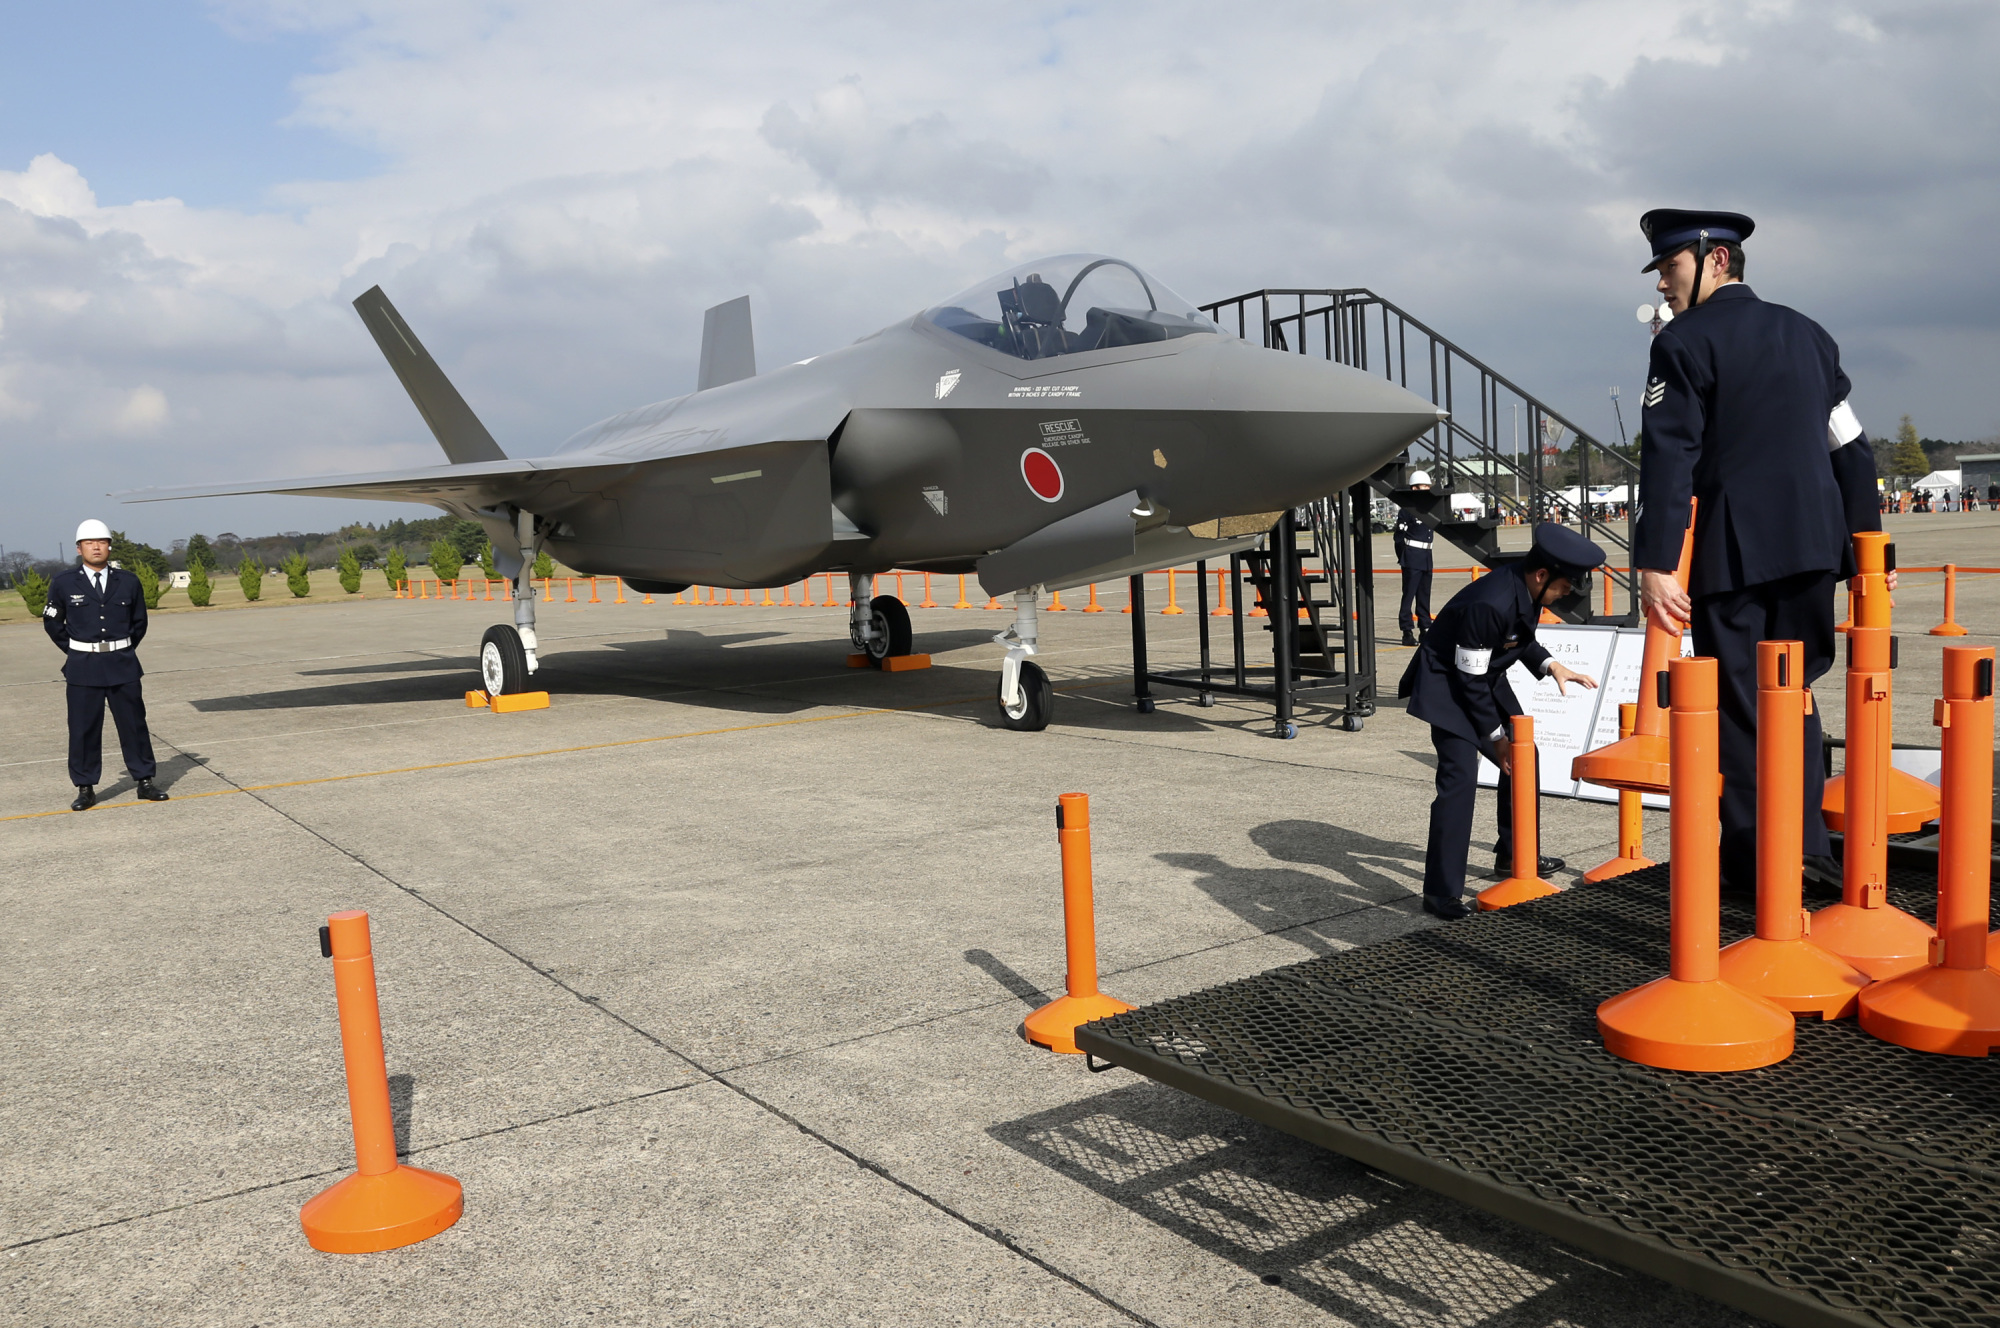 Air Self-Defense Force members set up cordons to protect a mock-up of an F-35 fighter jet during the annual Self-Defense Forces Commencement of Air Review at Hyakuri Air Base, north of Tokyo, in October 2014. | AP